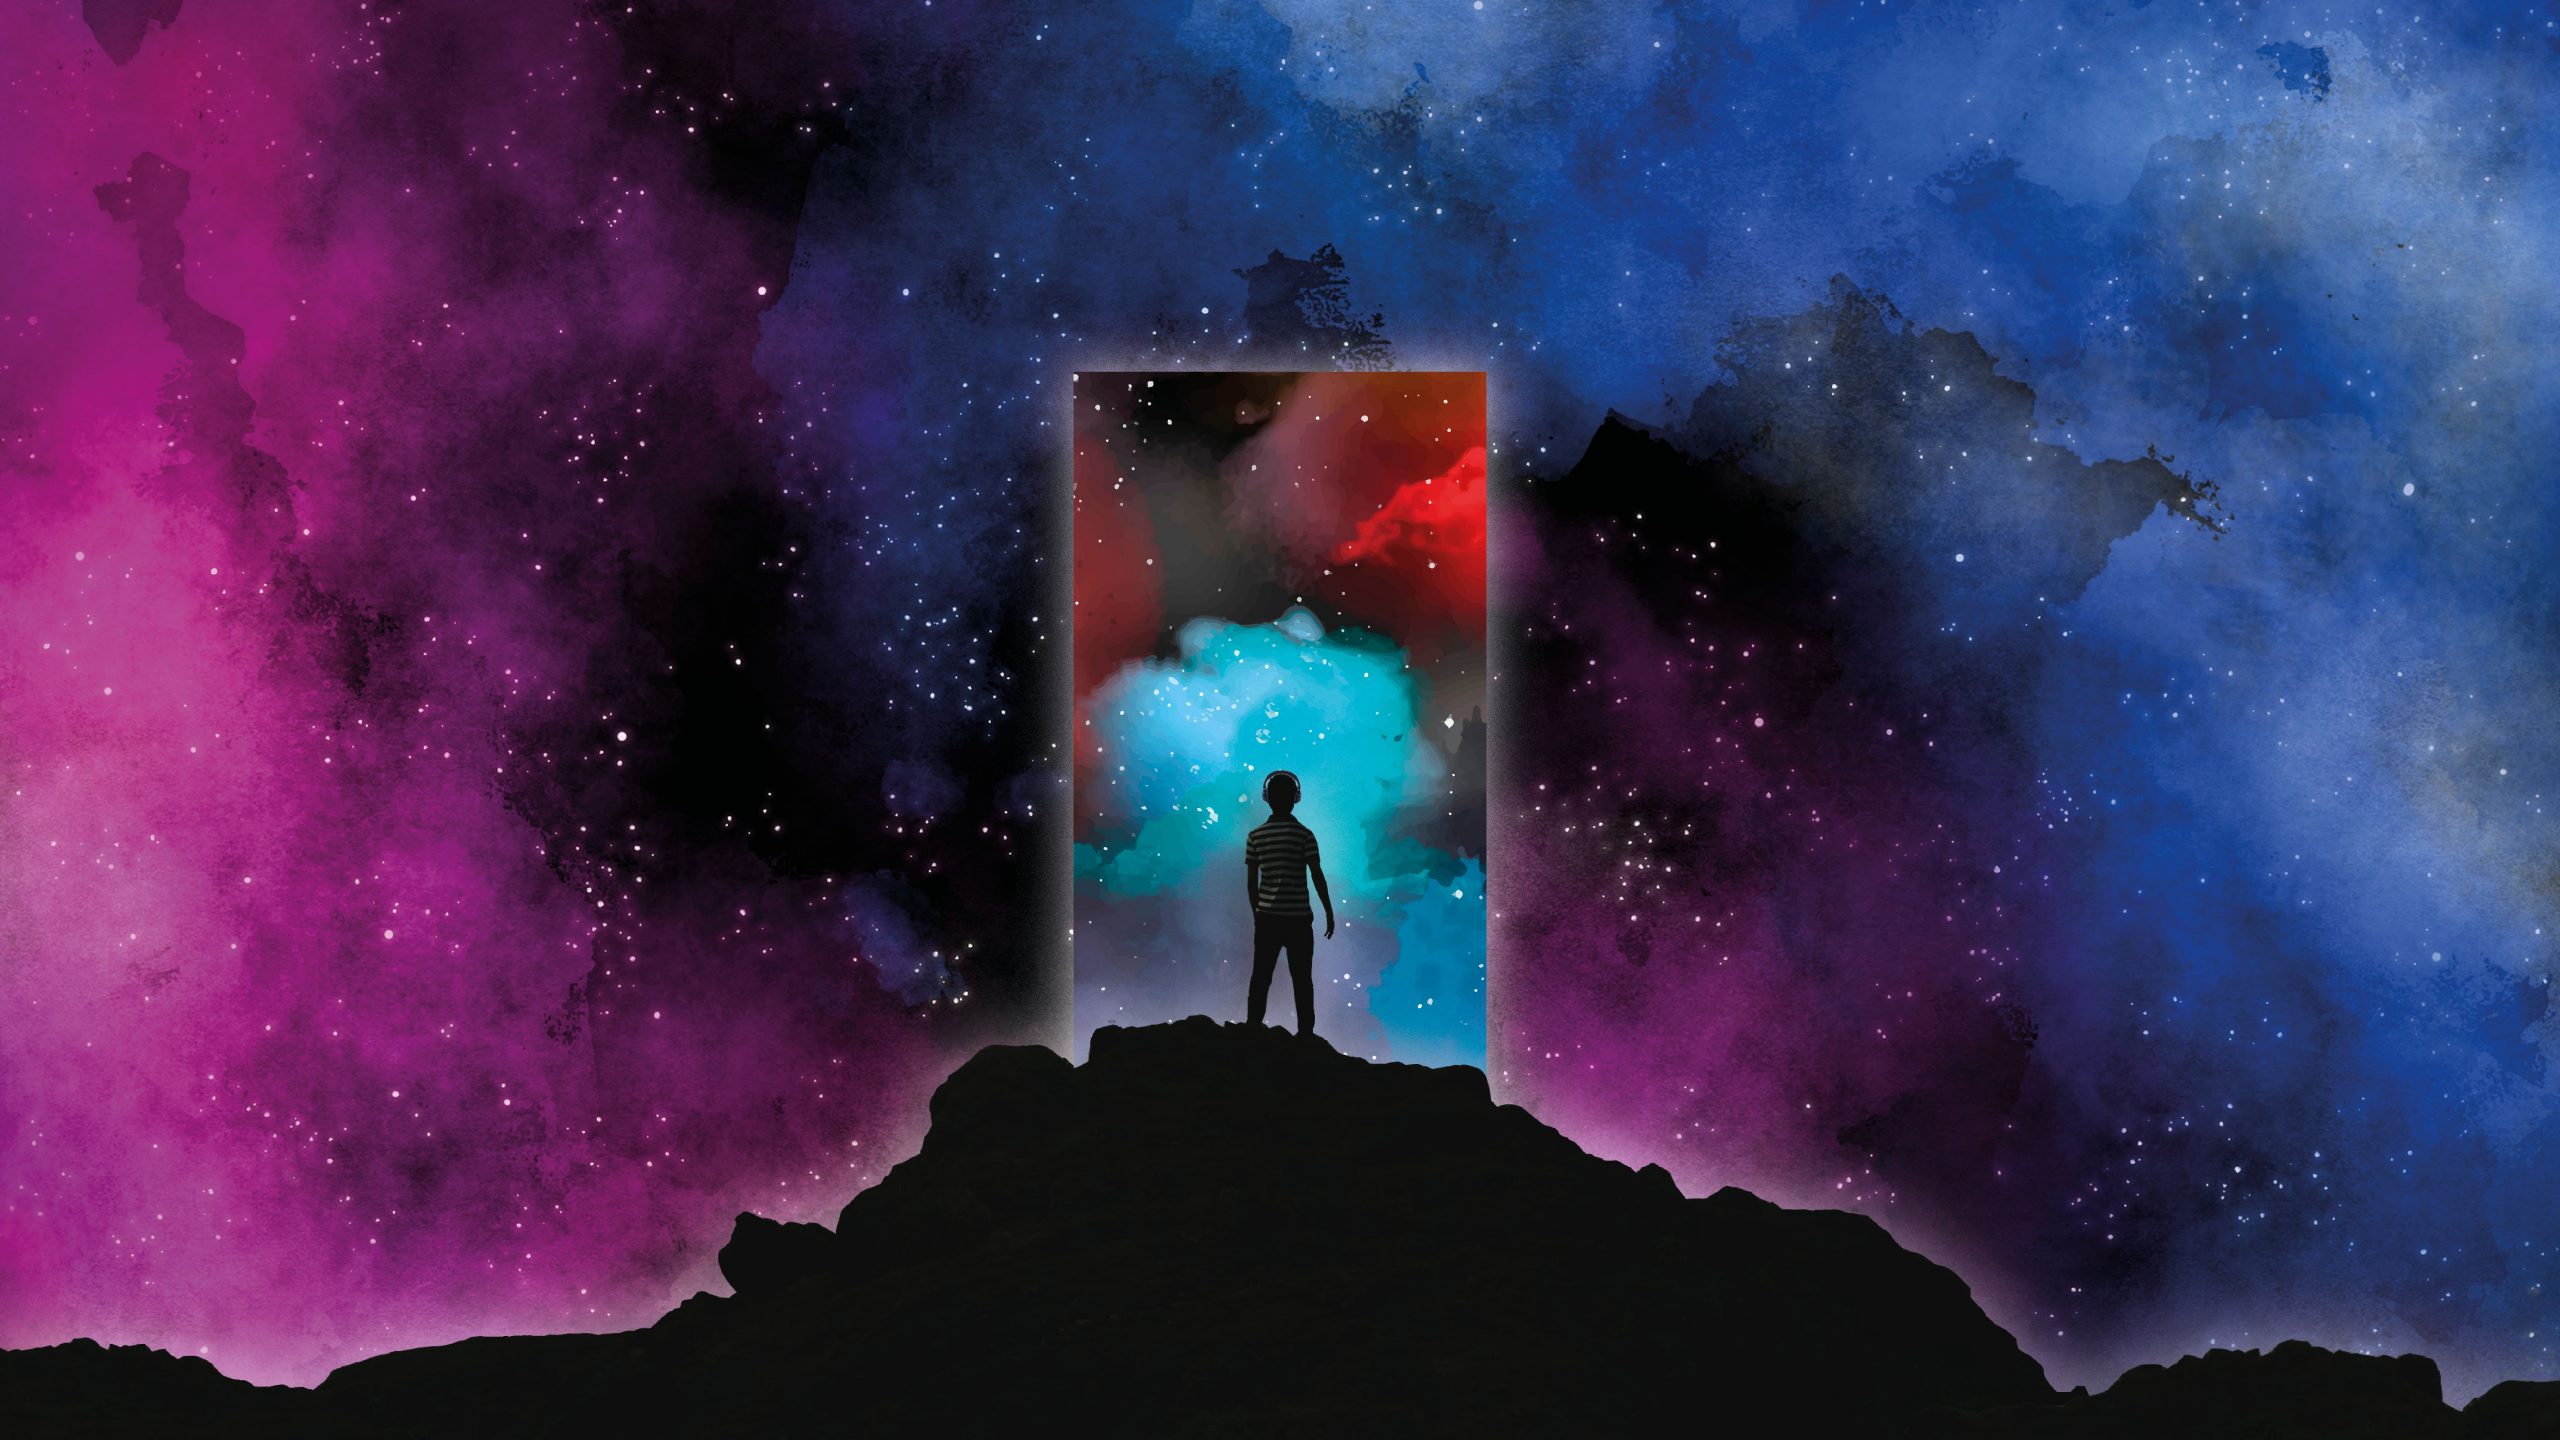 A person stands on a hill in front of a portal-door with swirling blue and purple clouds around them.